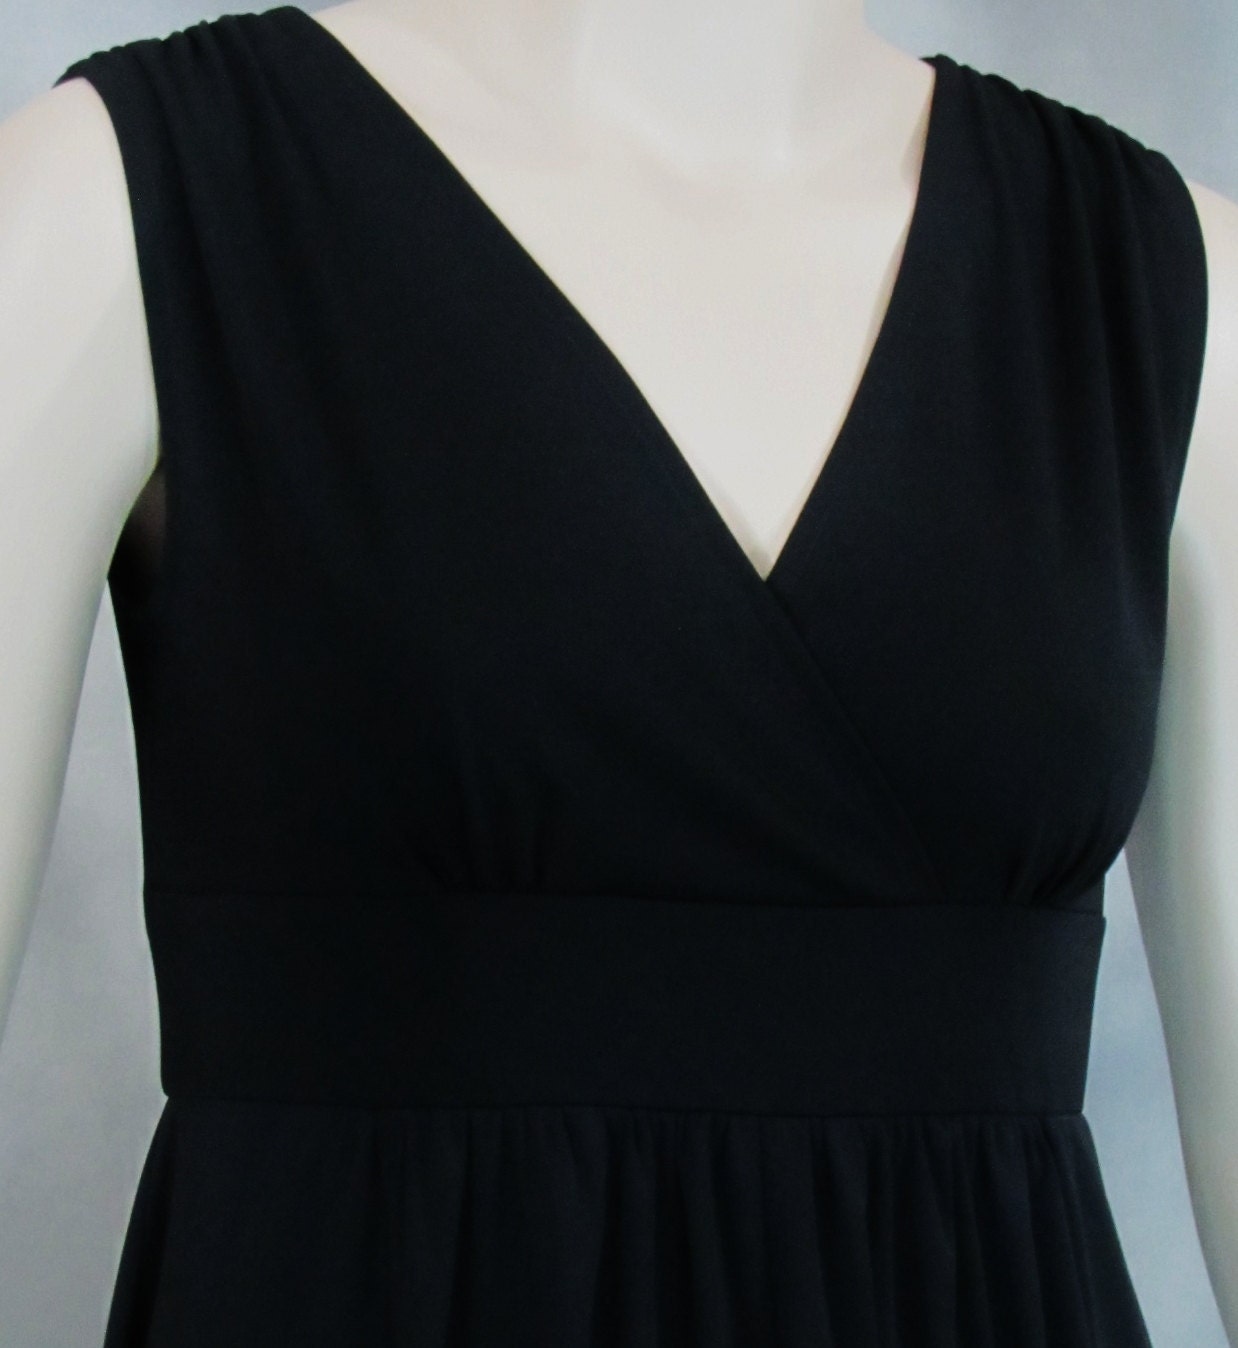 Empire Waist Shirred Cocktail Dress Knee Length Misses Plus Sizes 2-28 FREE Shipping USA Canada